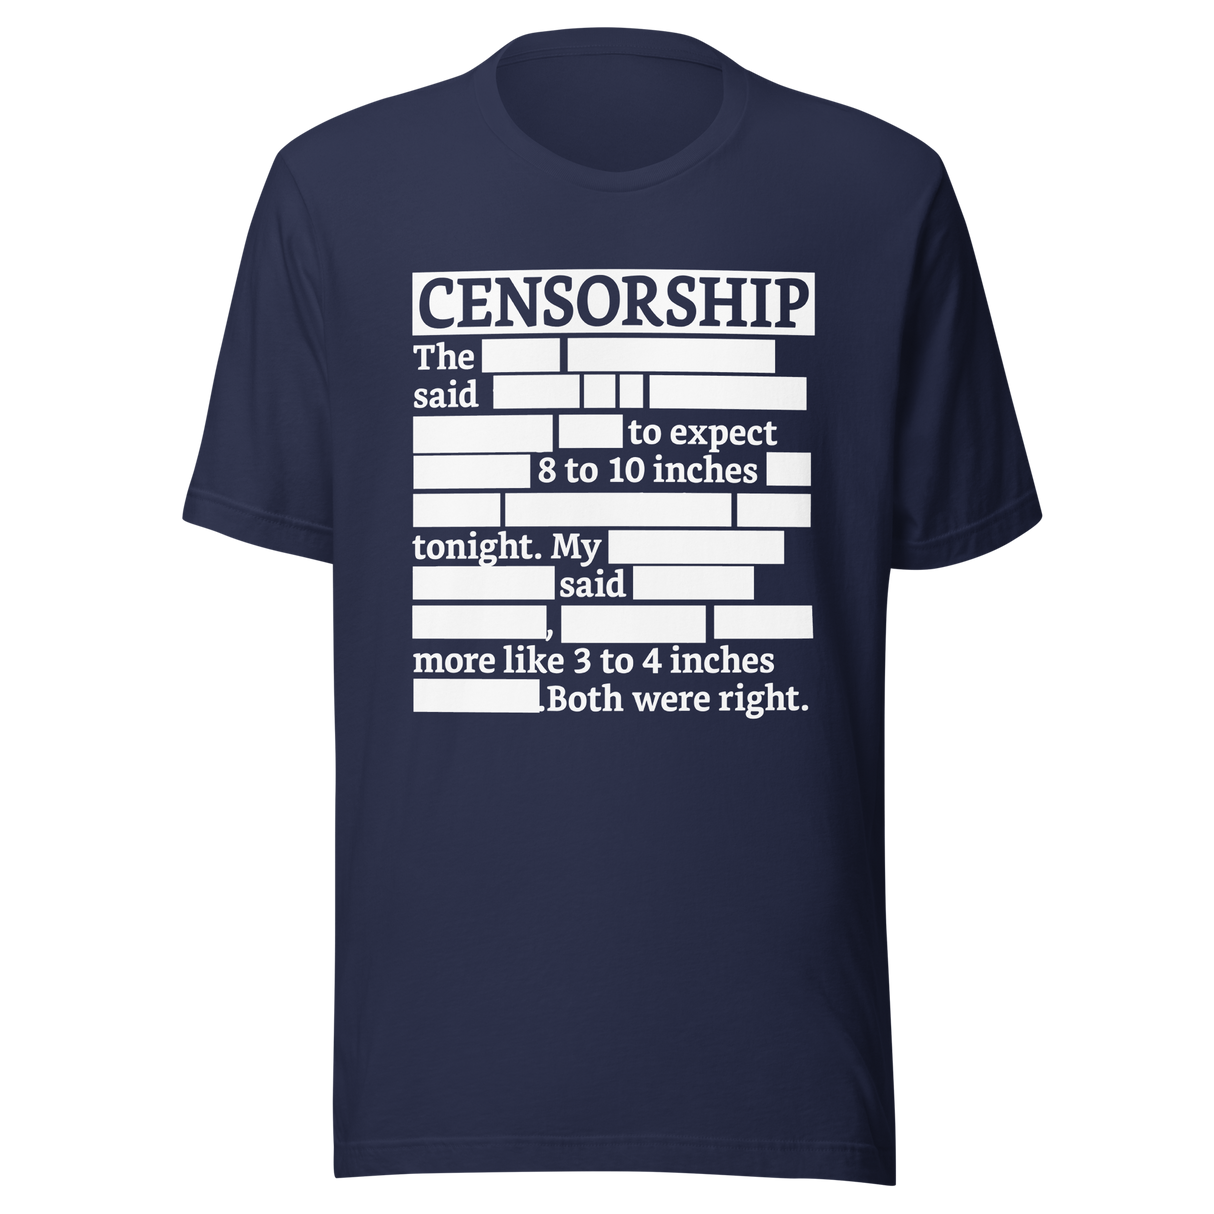 censorship-the-said-to-expect-8-to-10-inches-tonight-my-husband-said-more-like-3-to-4-inches-both-were-right-censorship-tee-funny-weatherman-tee-tee#color_navy